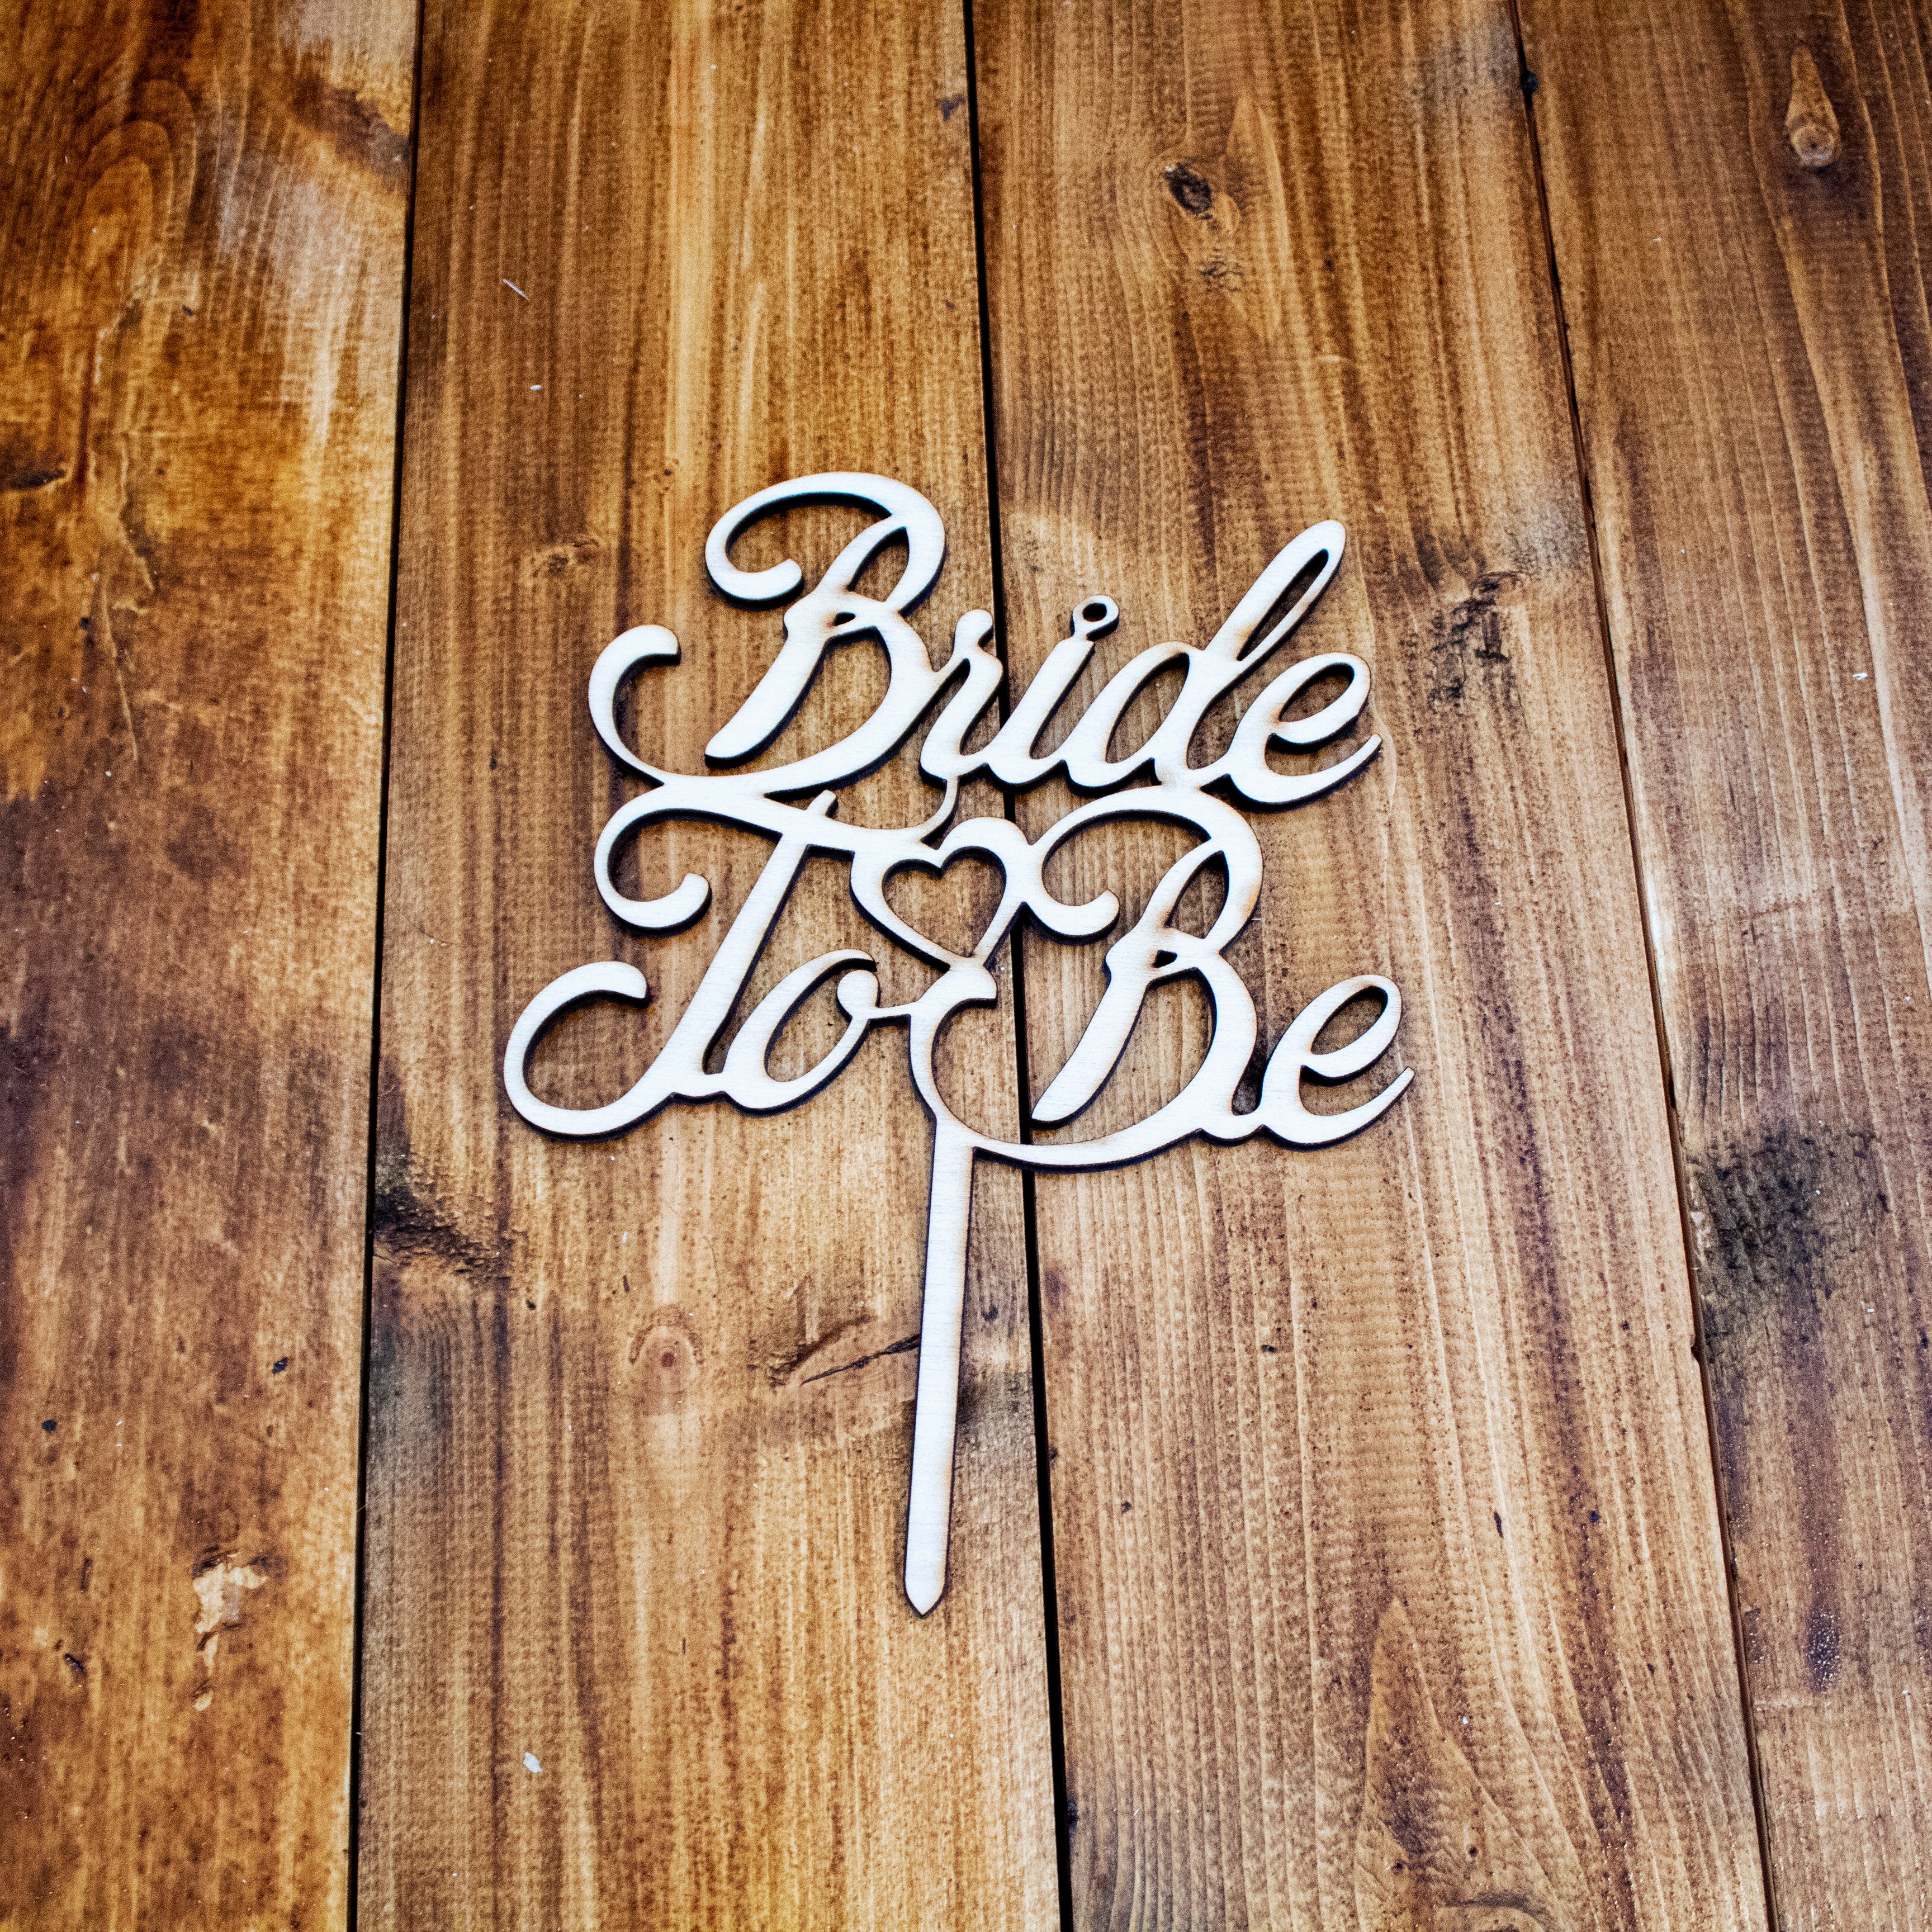 Bride to be Wooden Cake Topper - Wooden Cake Topper - Wooderland